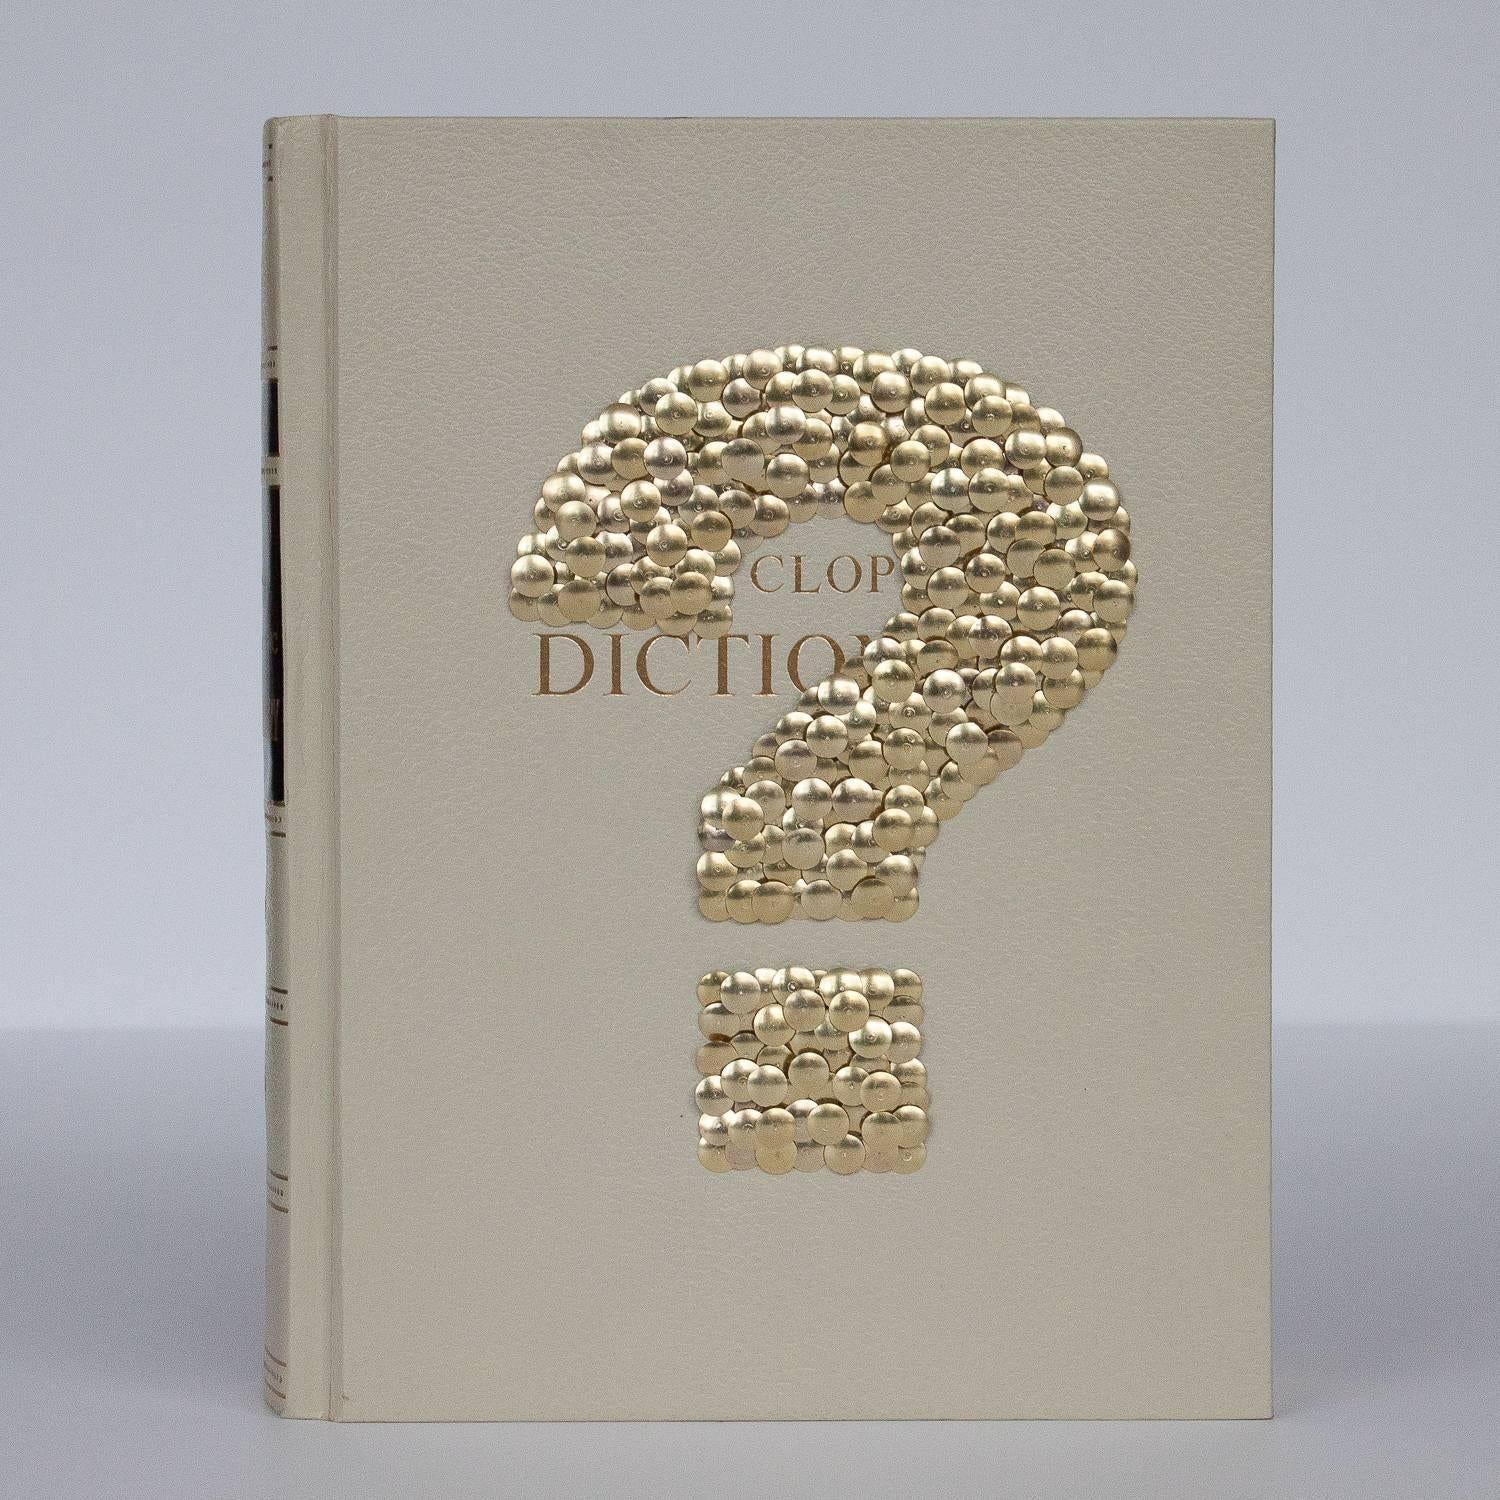 Hand gilded copy of Funk & Wagnalls - 1972 Standard Encyclopedic Dictionary with brass thumbtacks forming a question mark on the front cover by Chicago artist Brian Stanziale. 

Sculptural and playful, 